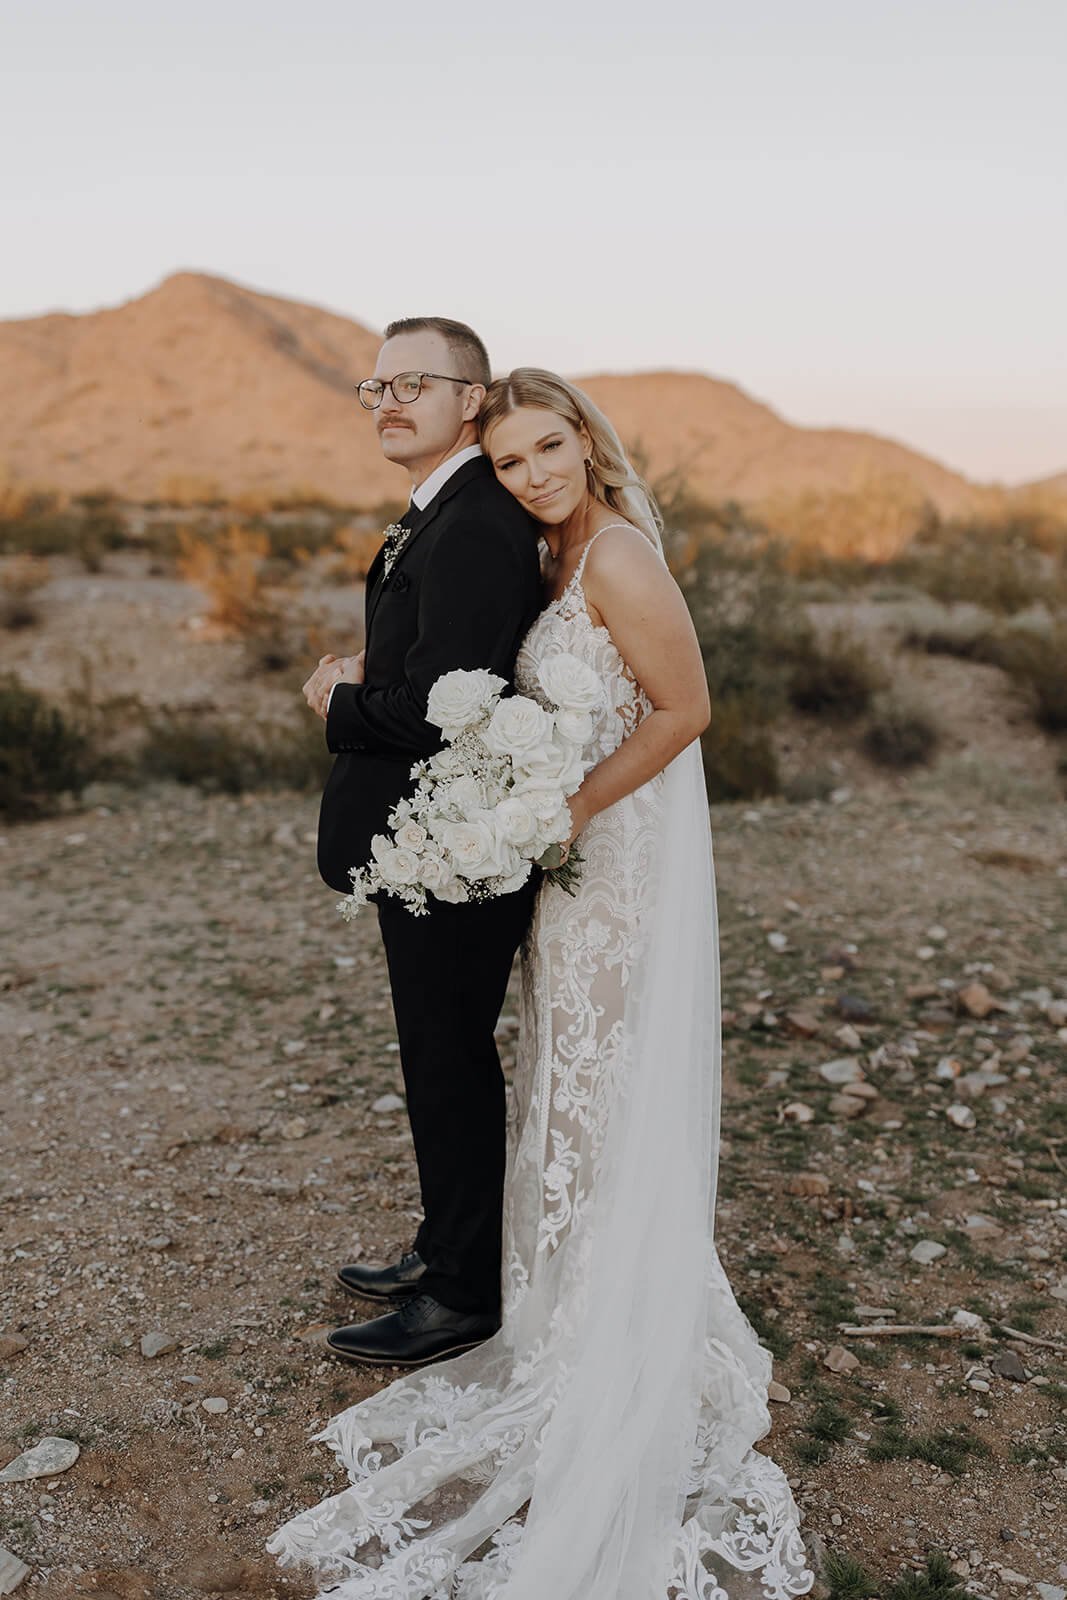 Bride and groom pose in the desert with mountains in the background